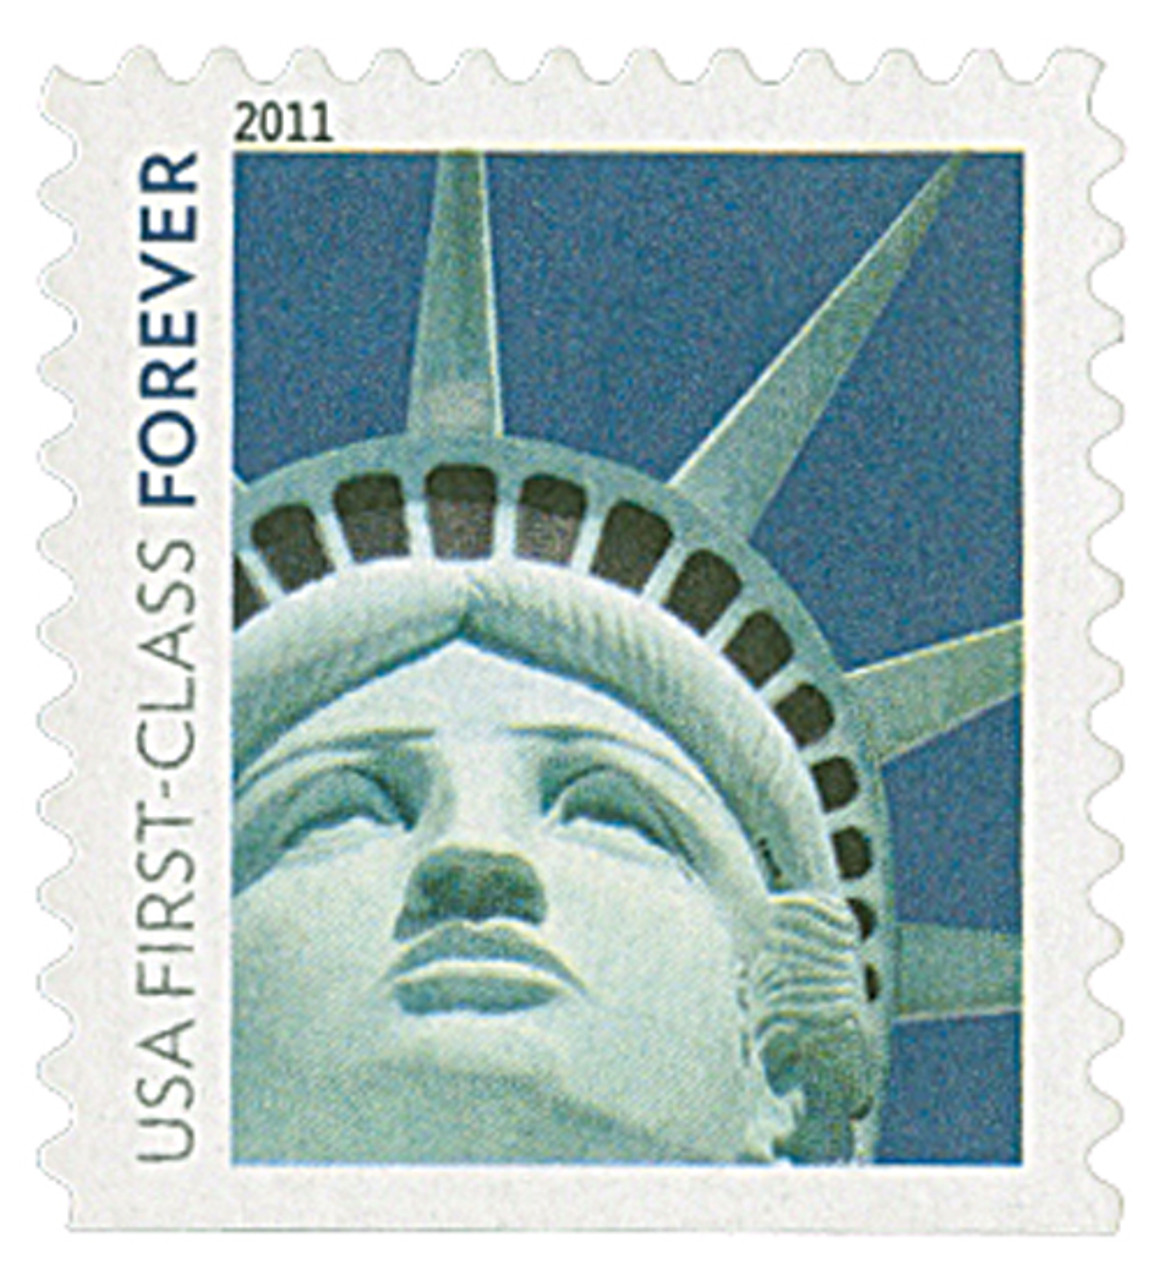 5131 - 2016 First-Class Forever Stamp - Patriotic Spiral (Ashton Potter,  booklet) - Mystic Stamp Company